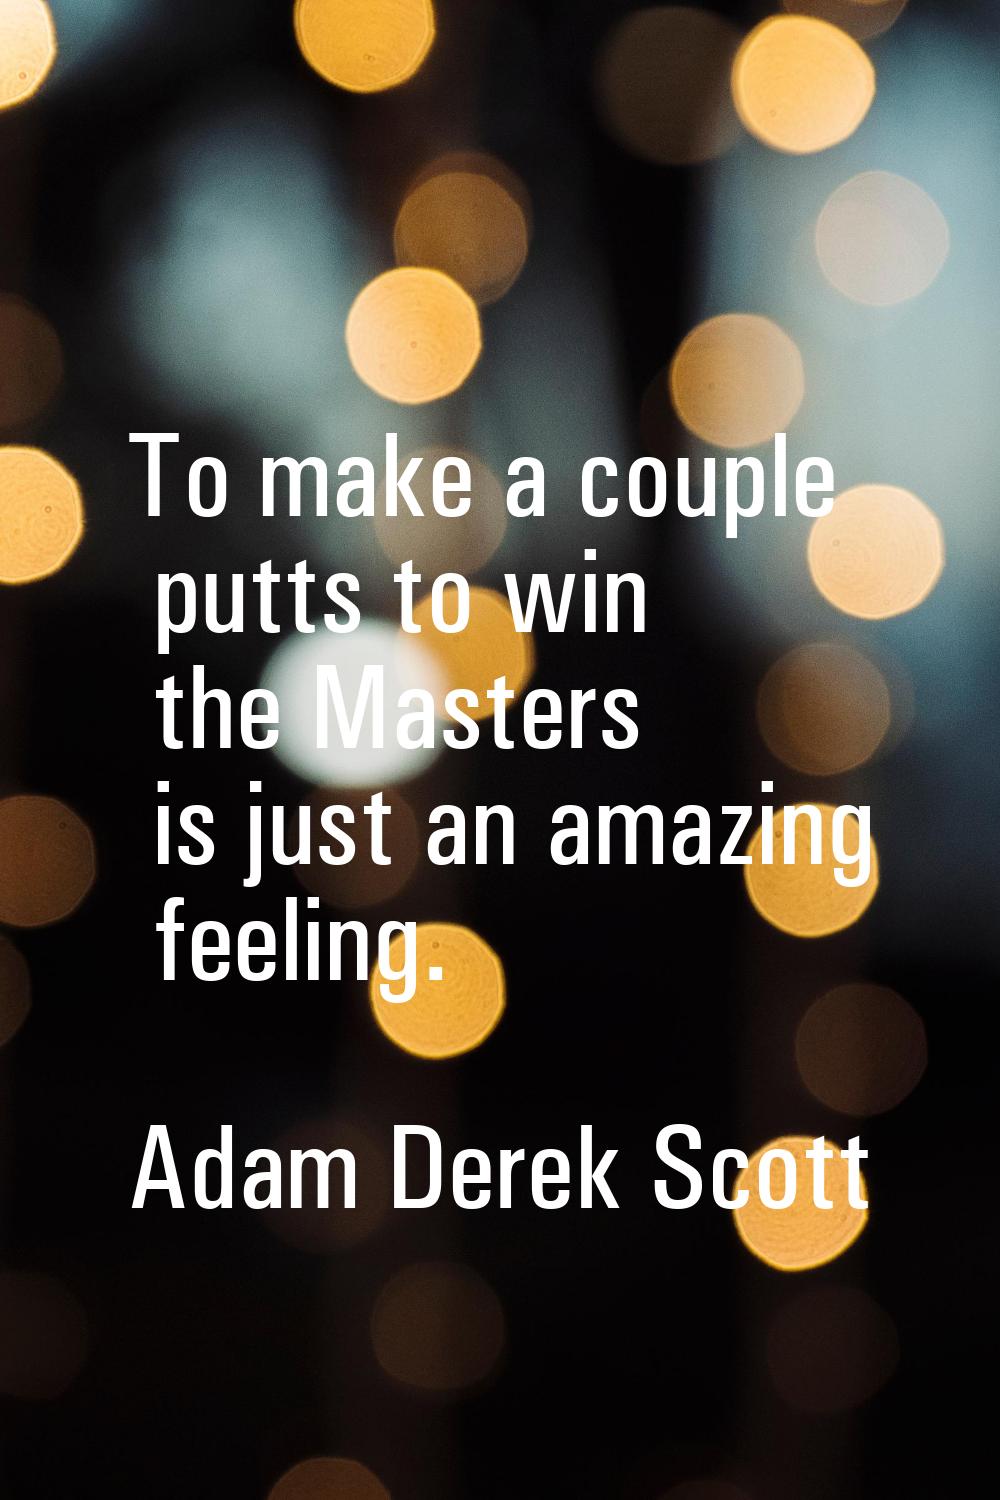 To make a couple putts to win the Masters is just an amazing feeling.